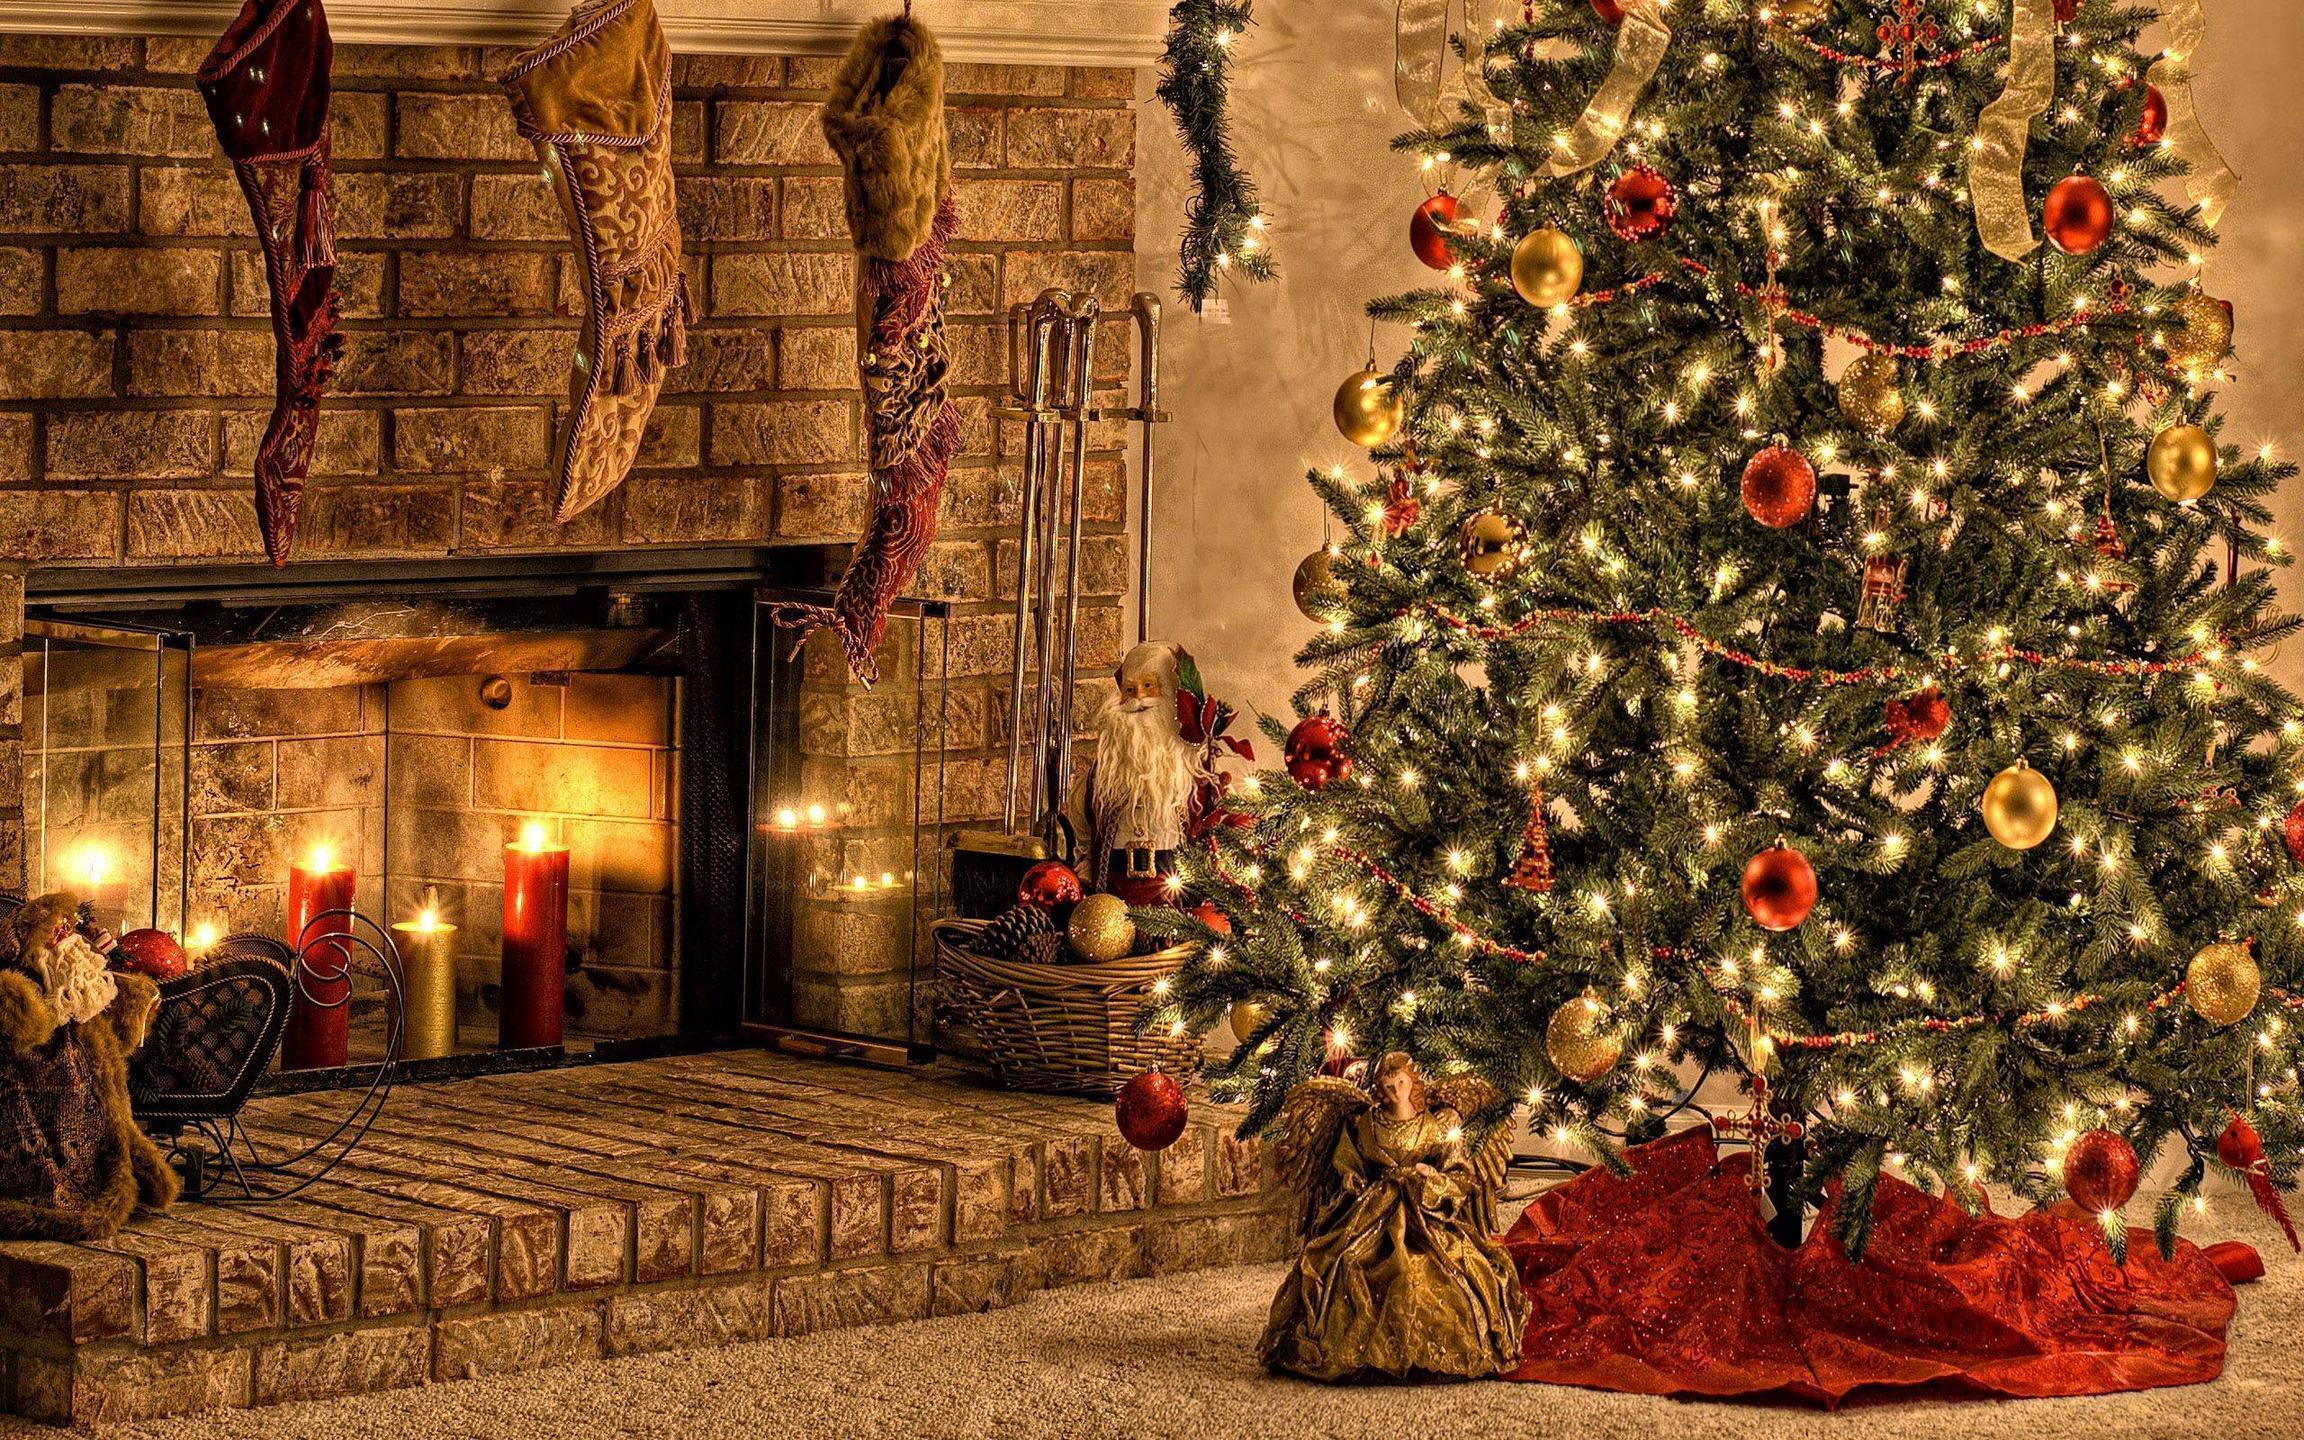 4K Christmas Fireplaces Wallpapers High Quality | Download Free